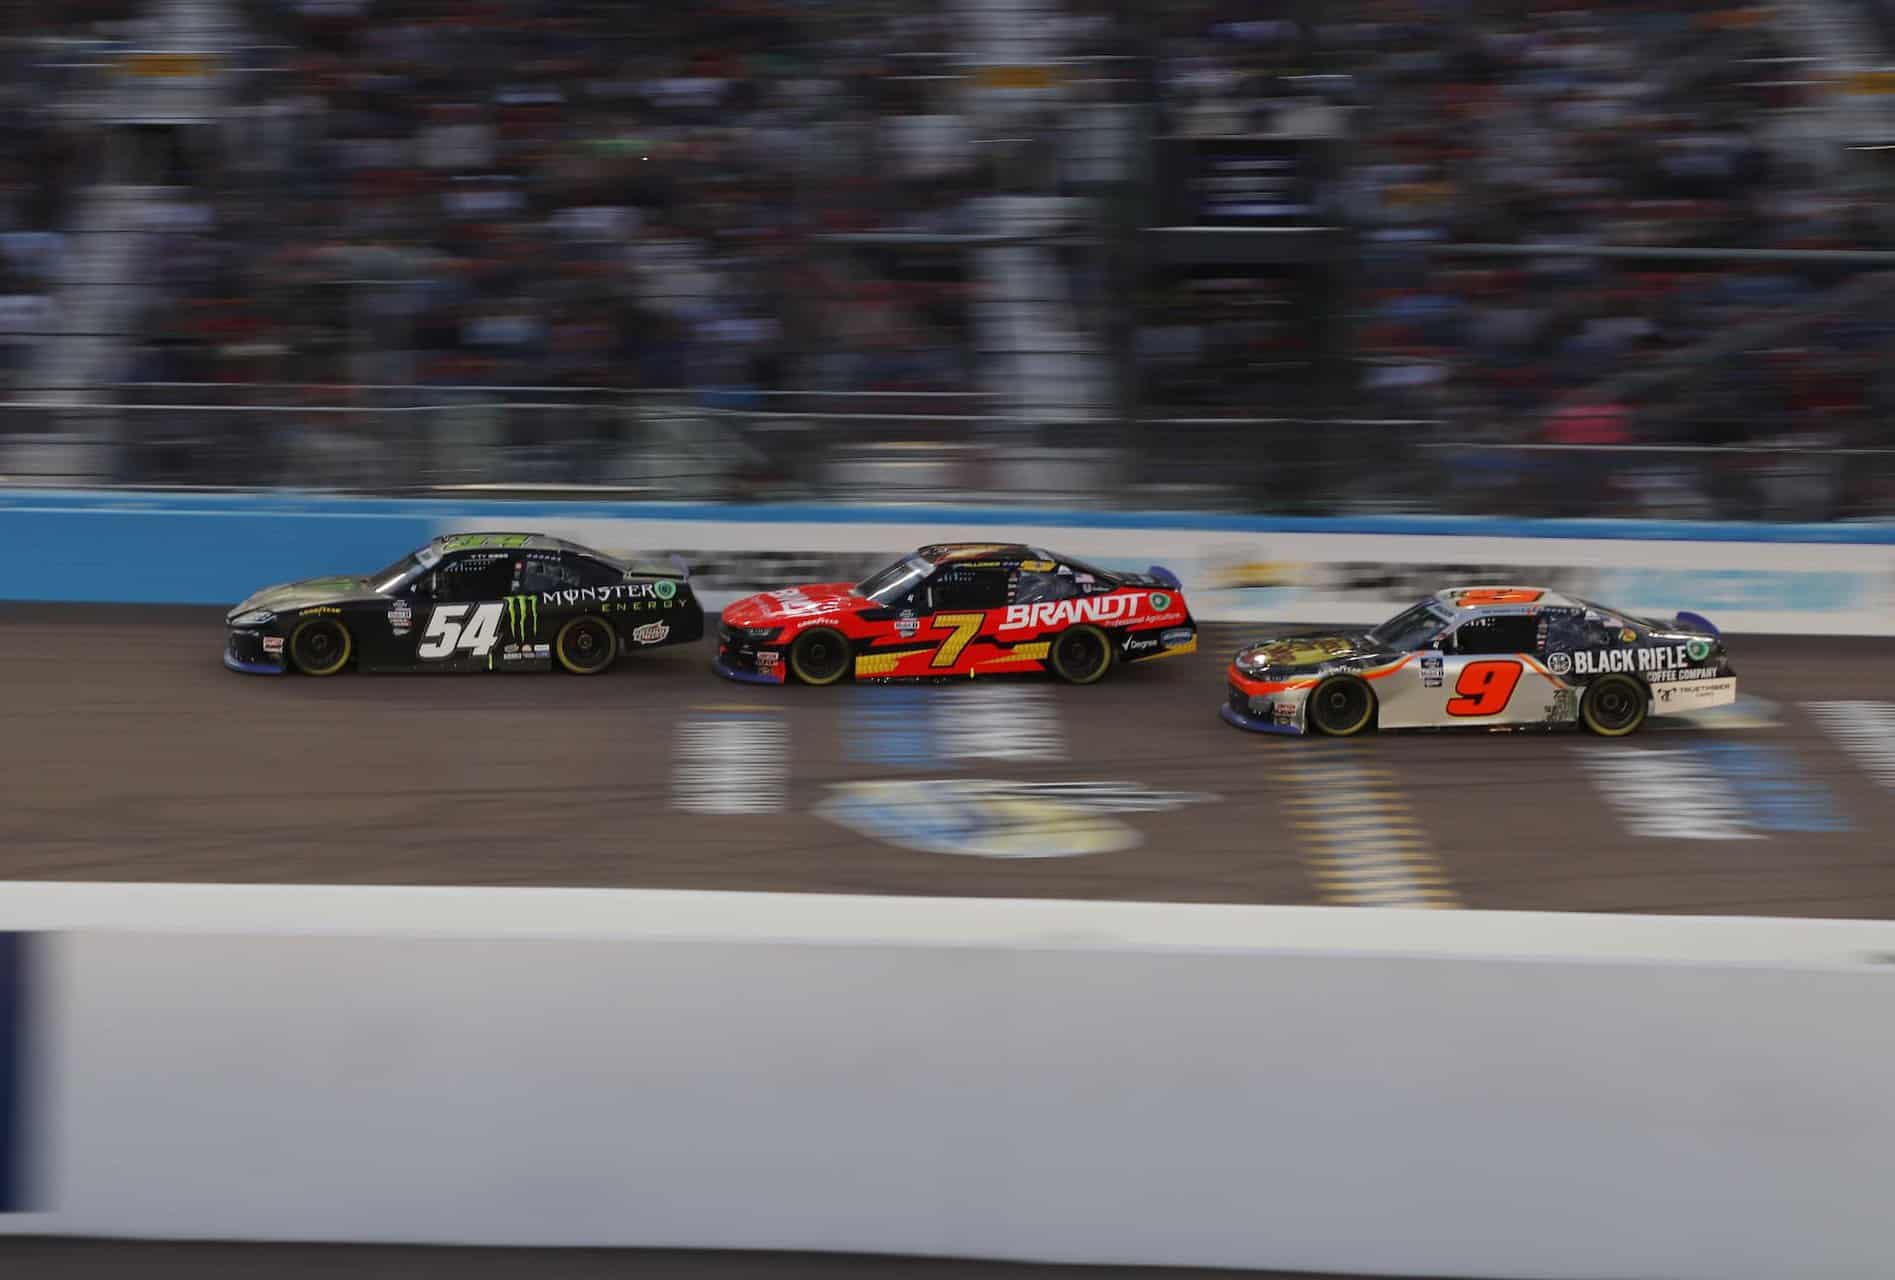 Ty gibbs (54) battles with justin allgaier (7) and noah gragson (9) in the closing laps at phoenix raceway. Photo by olivia whissell / kickin' the tires